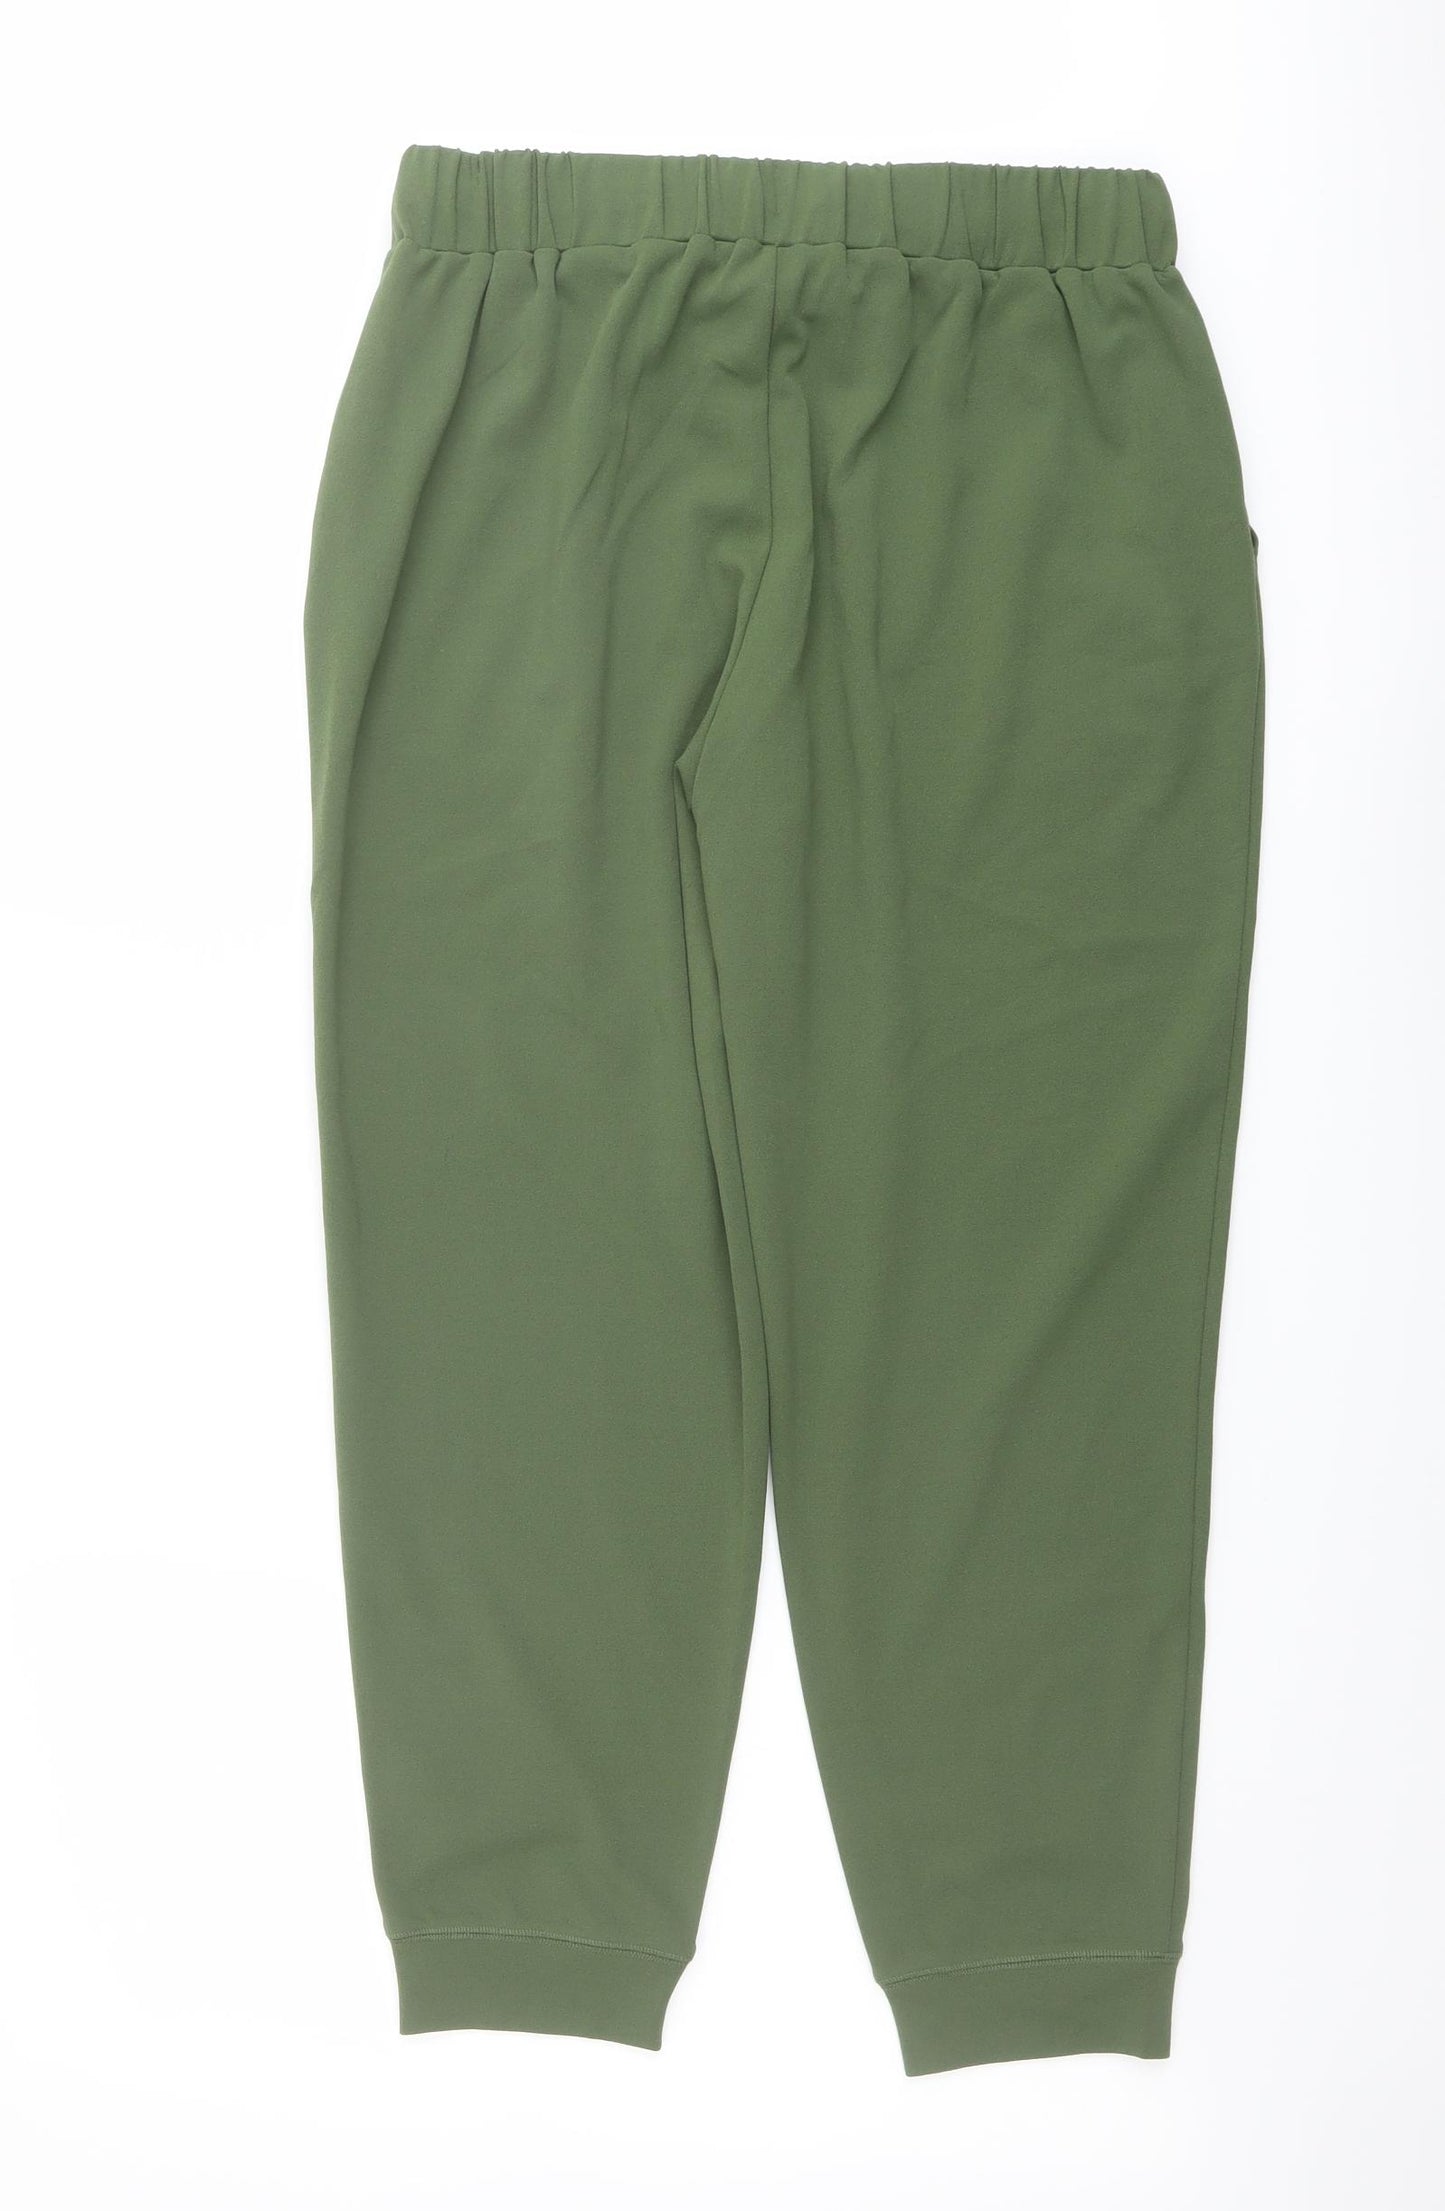 41Hawthorn Womens Green Polyester Jogger Trousers Size M L25 in Regular Drawstring